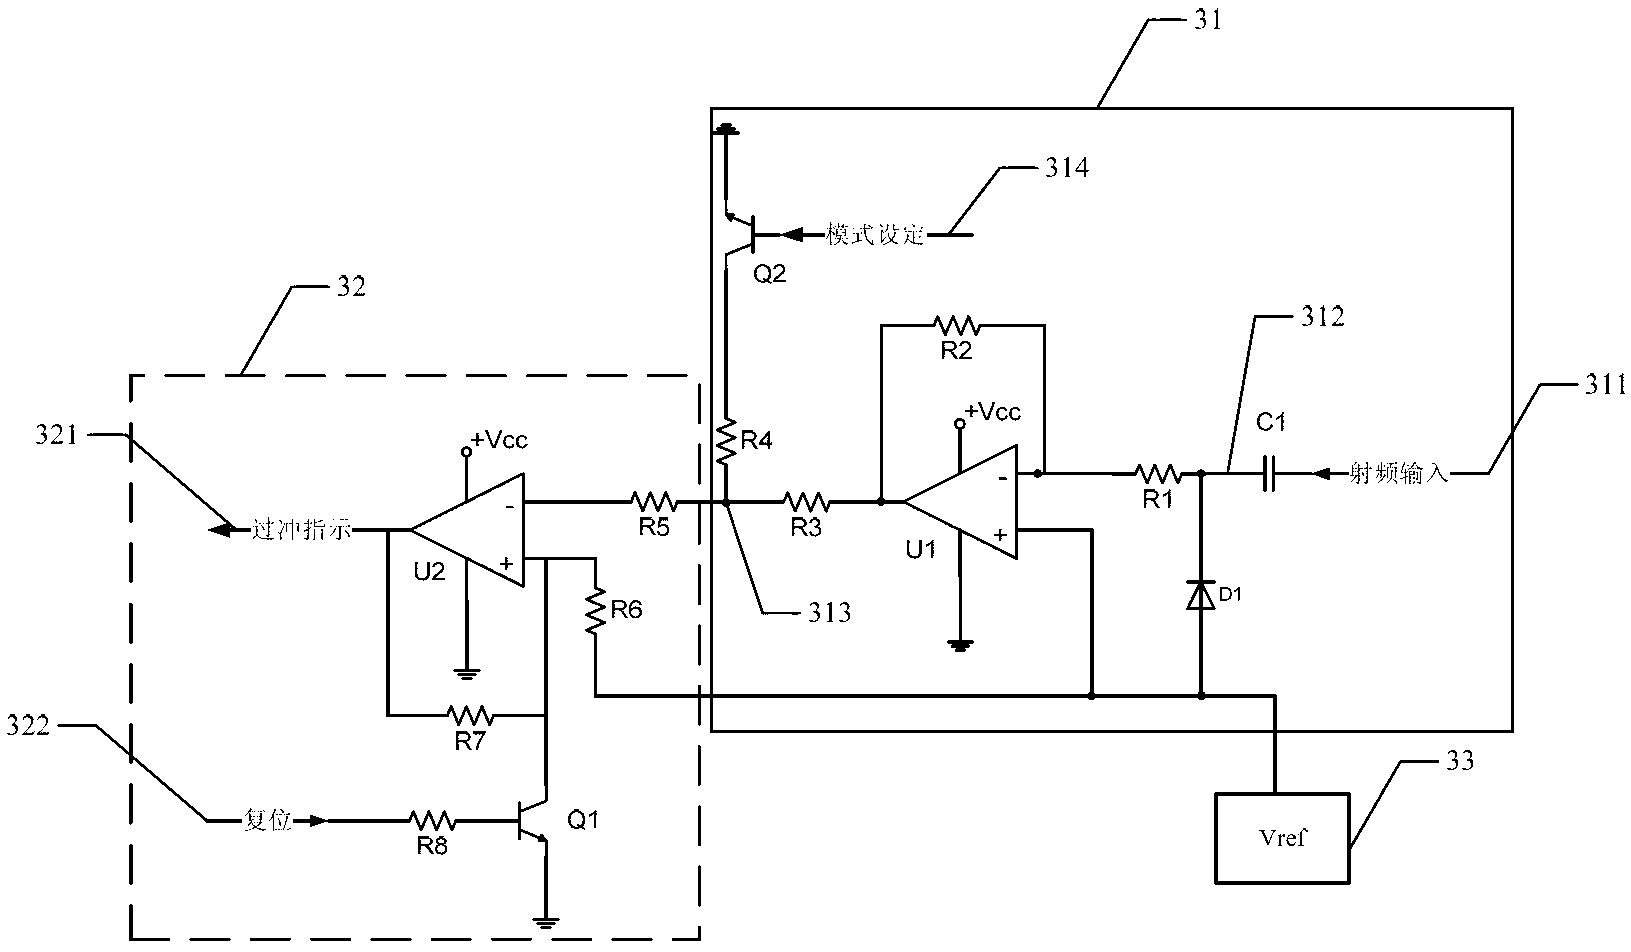 Power overshoot protection circuit for digital television power amplifier